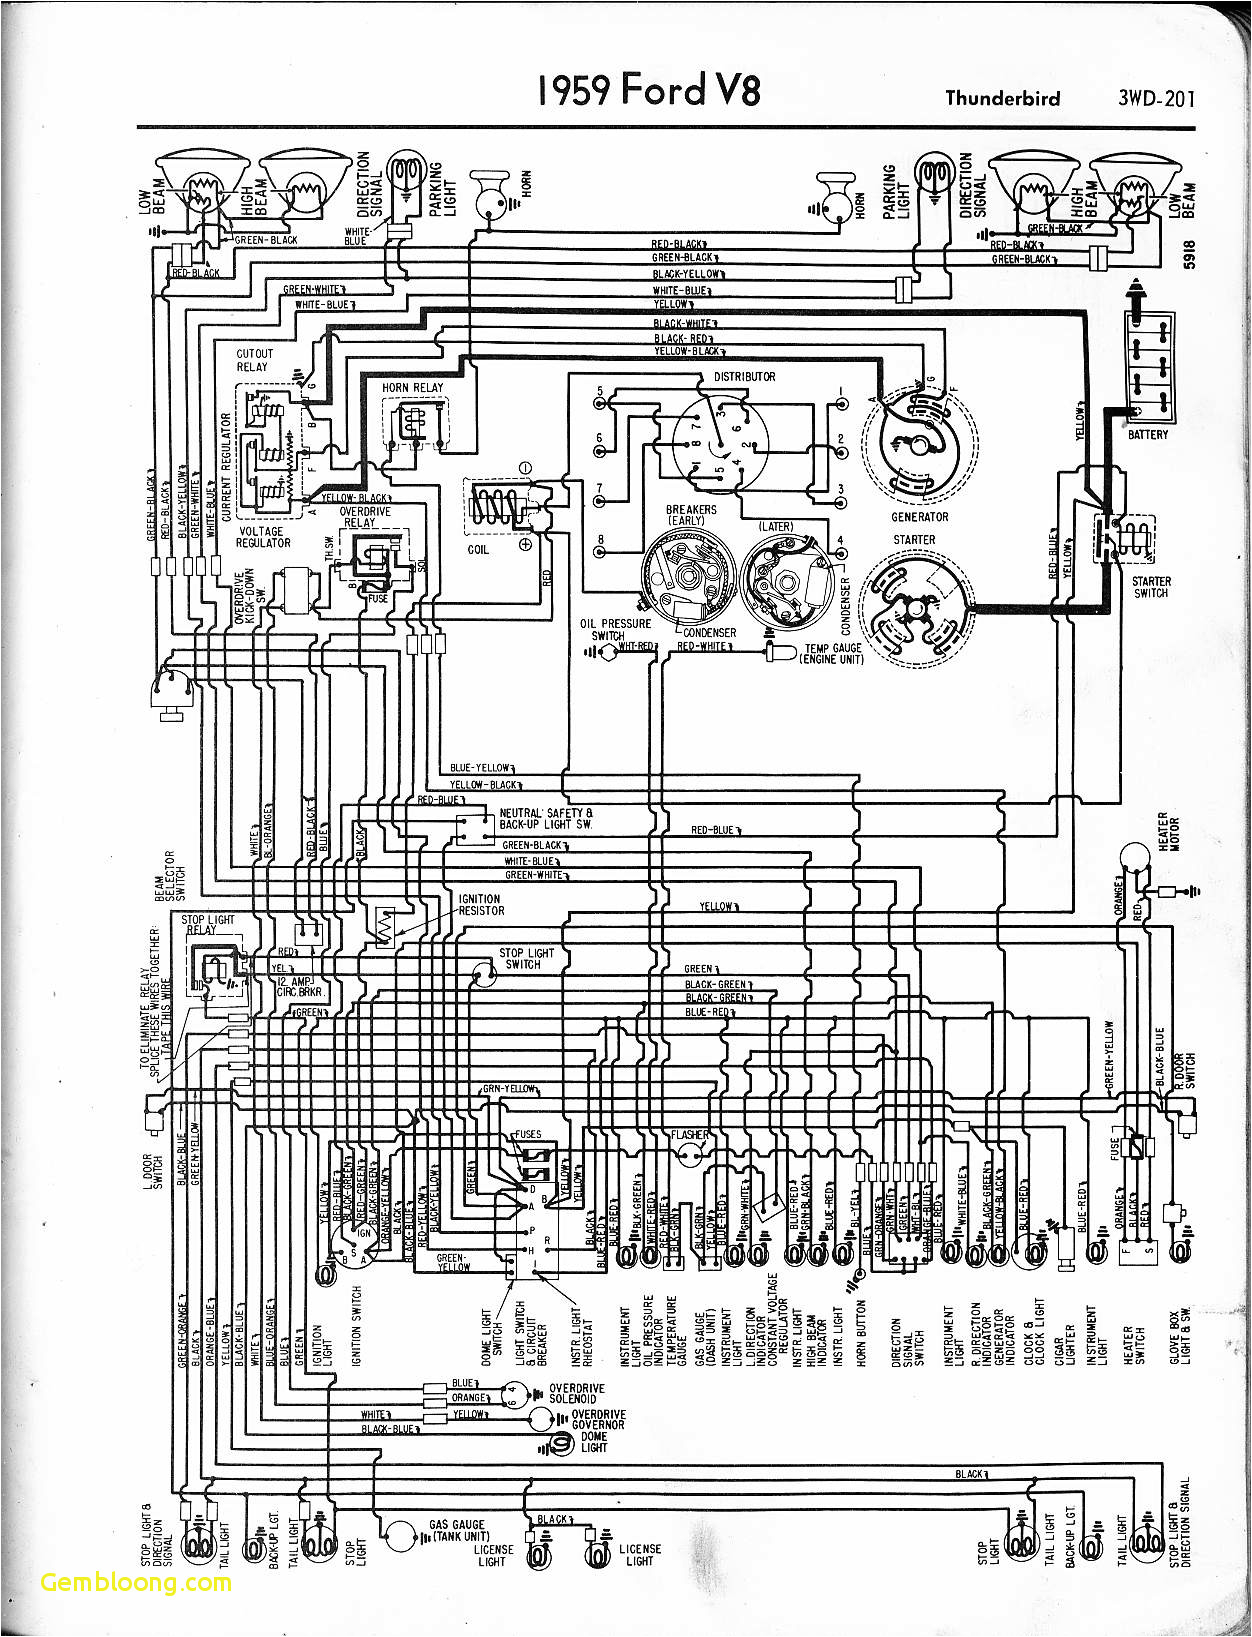 download ford trucks wiring diagrams ford f150 wiring diagrams best fl50 wiring diagram